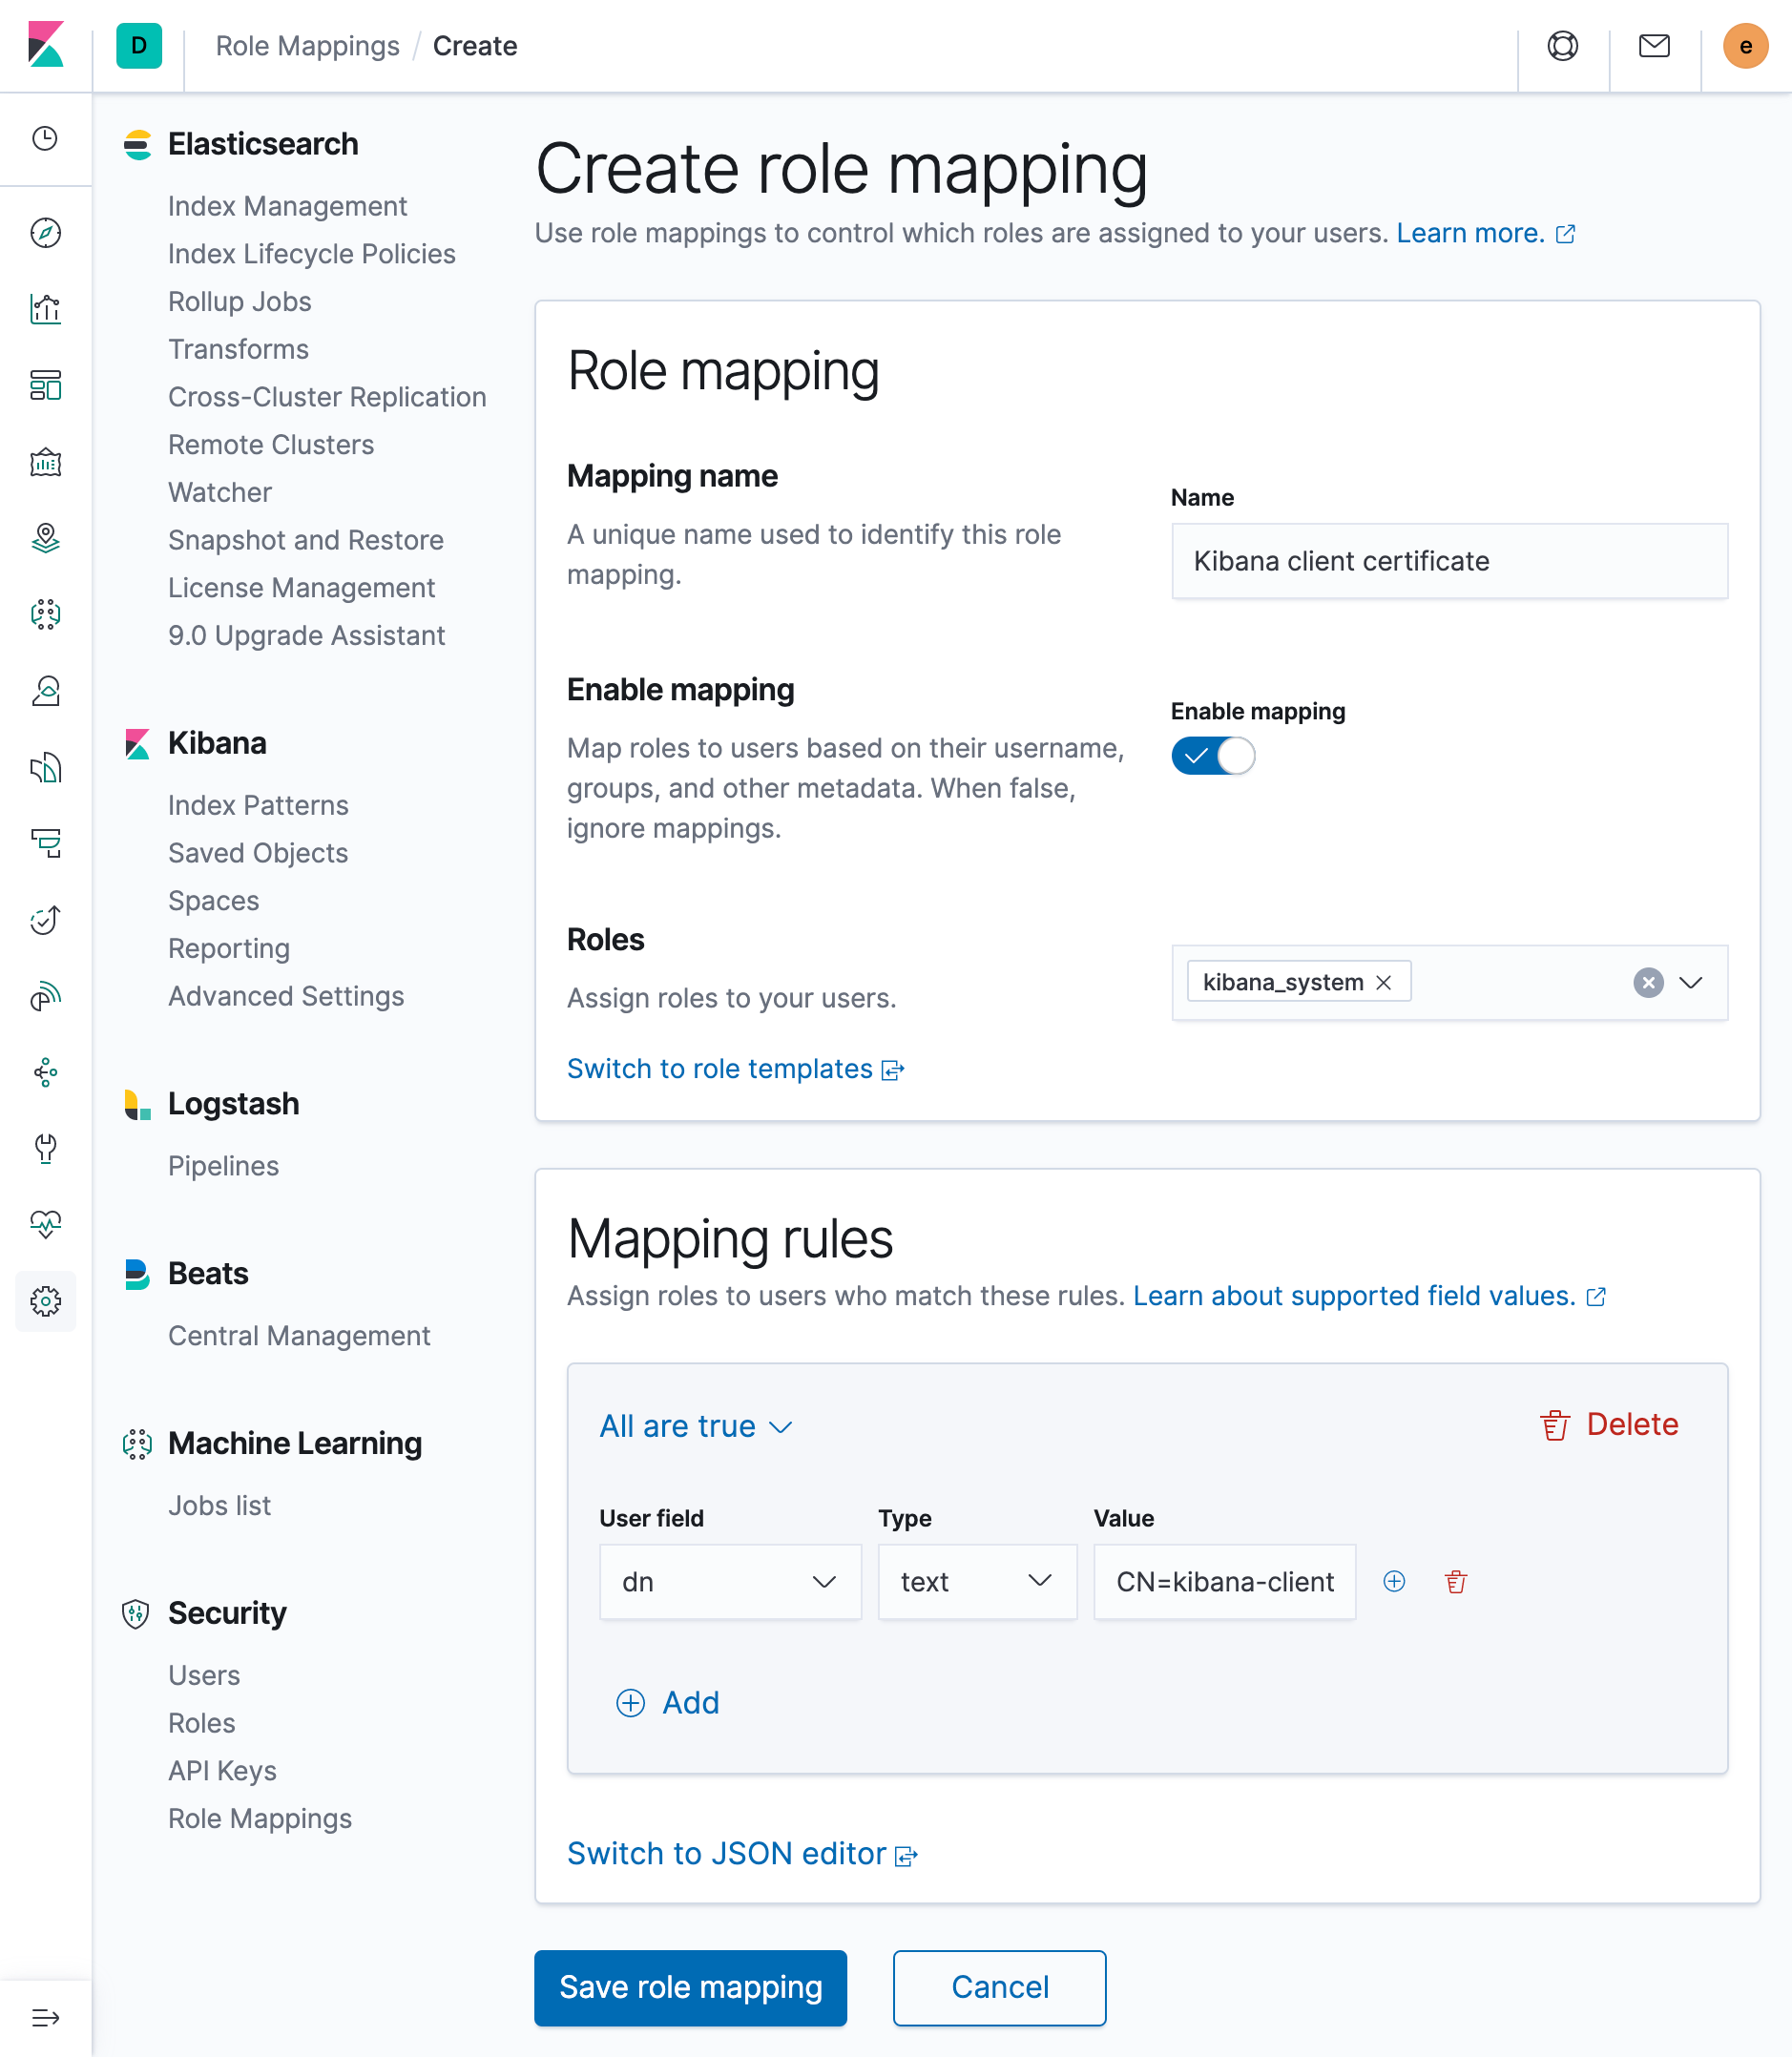 Role mapping for the Kibana client certificate